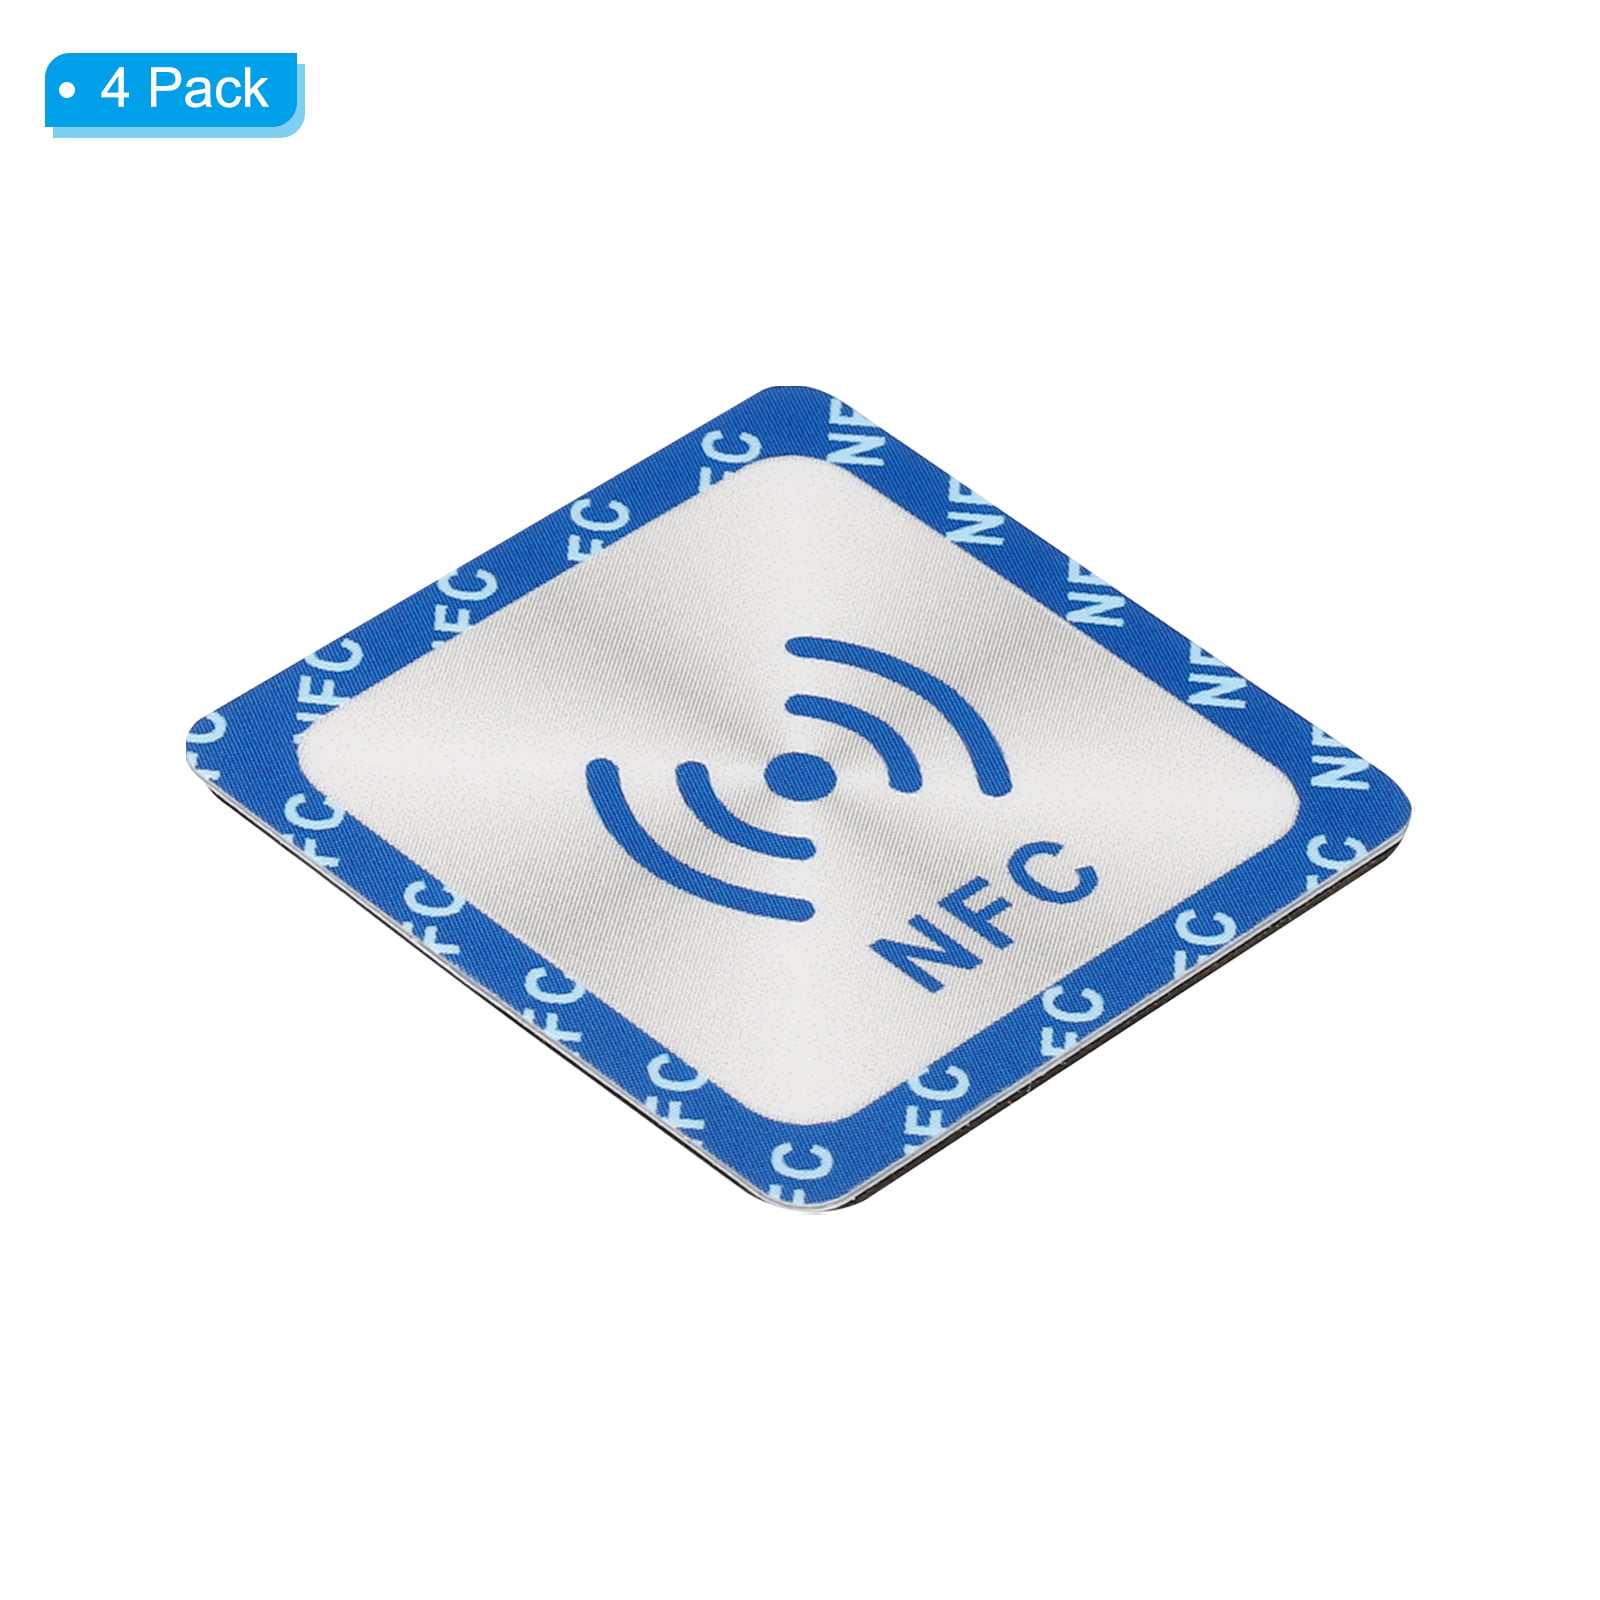 Uxcell NFC Stickers NFC215 Tag Sticker 504 Bytes Square NFC Tags Blue 4  Pack 